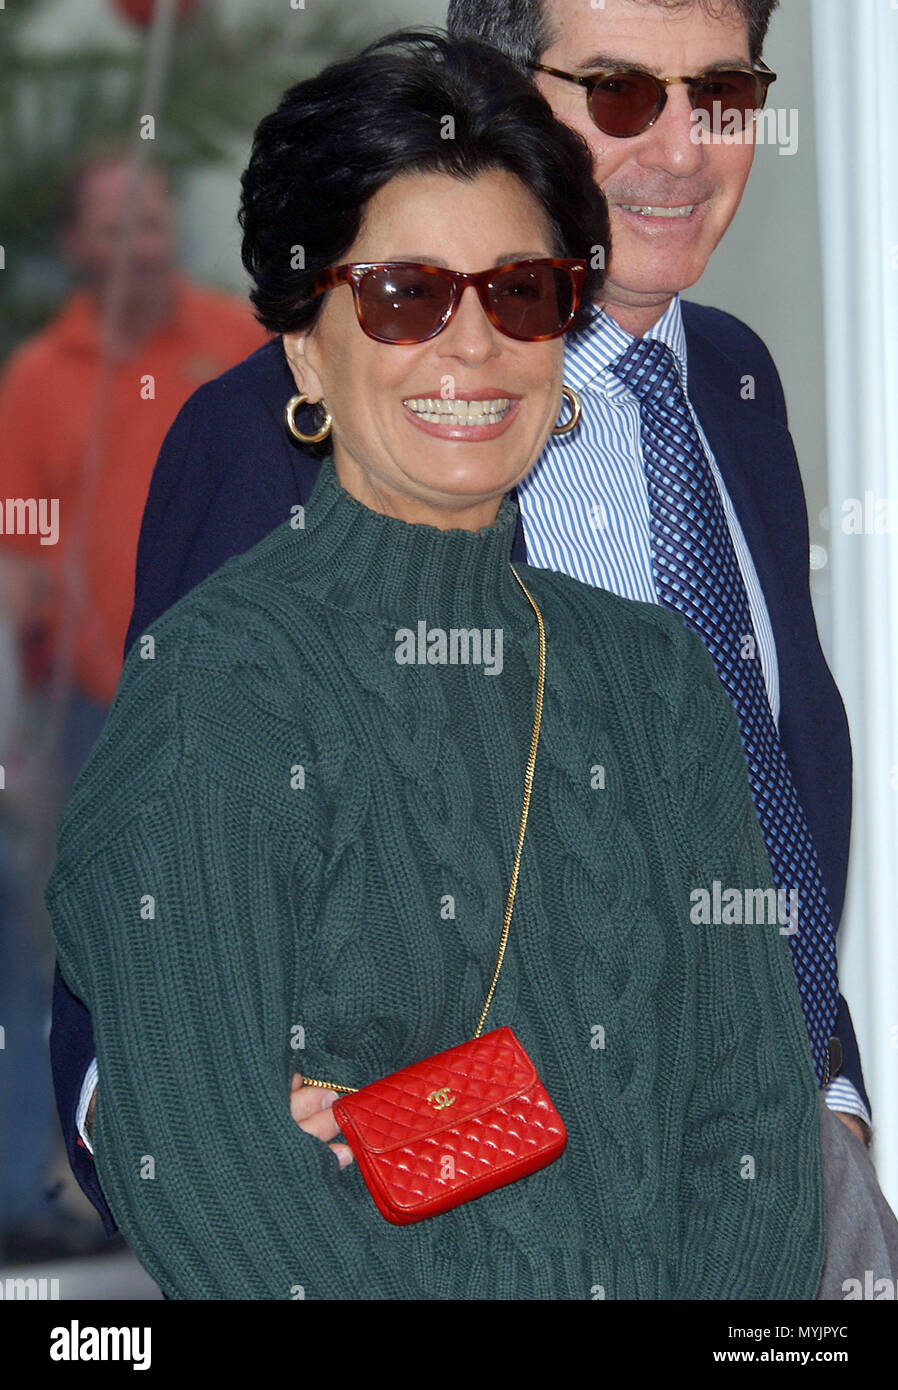 Tina Sinatra at the ceremony for Sherry Lansing immortalize in the Forecourt of the Chinese Theatre in Los Angeles. February 16, 2005.          -            SinatraTina082.jpgSinatraTina082  Event in Hollywood Life - California, Red Carpet Event, USA, Film Industry, Celebrities, Photography, Bestof, Arts Culture and Entertainment, Topix Celebrities fashion, Best of, Hollywood Life, Event in Hollywood Life - California, movie celebrities, TV celebrities, Music celebrities, Topix, Bestof, Arts Culture and Entertainment, Photography,    inquiry tsuni@Gamma-USA.com , Credit Tsuni / USA, Honored wi Stock Photo